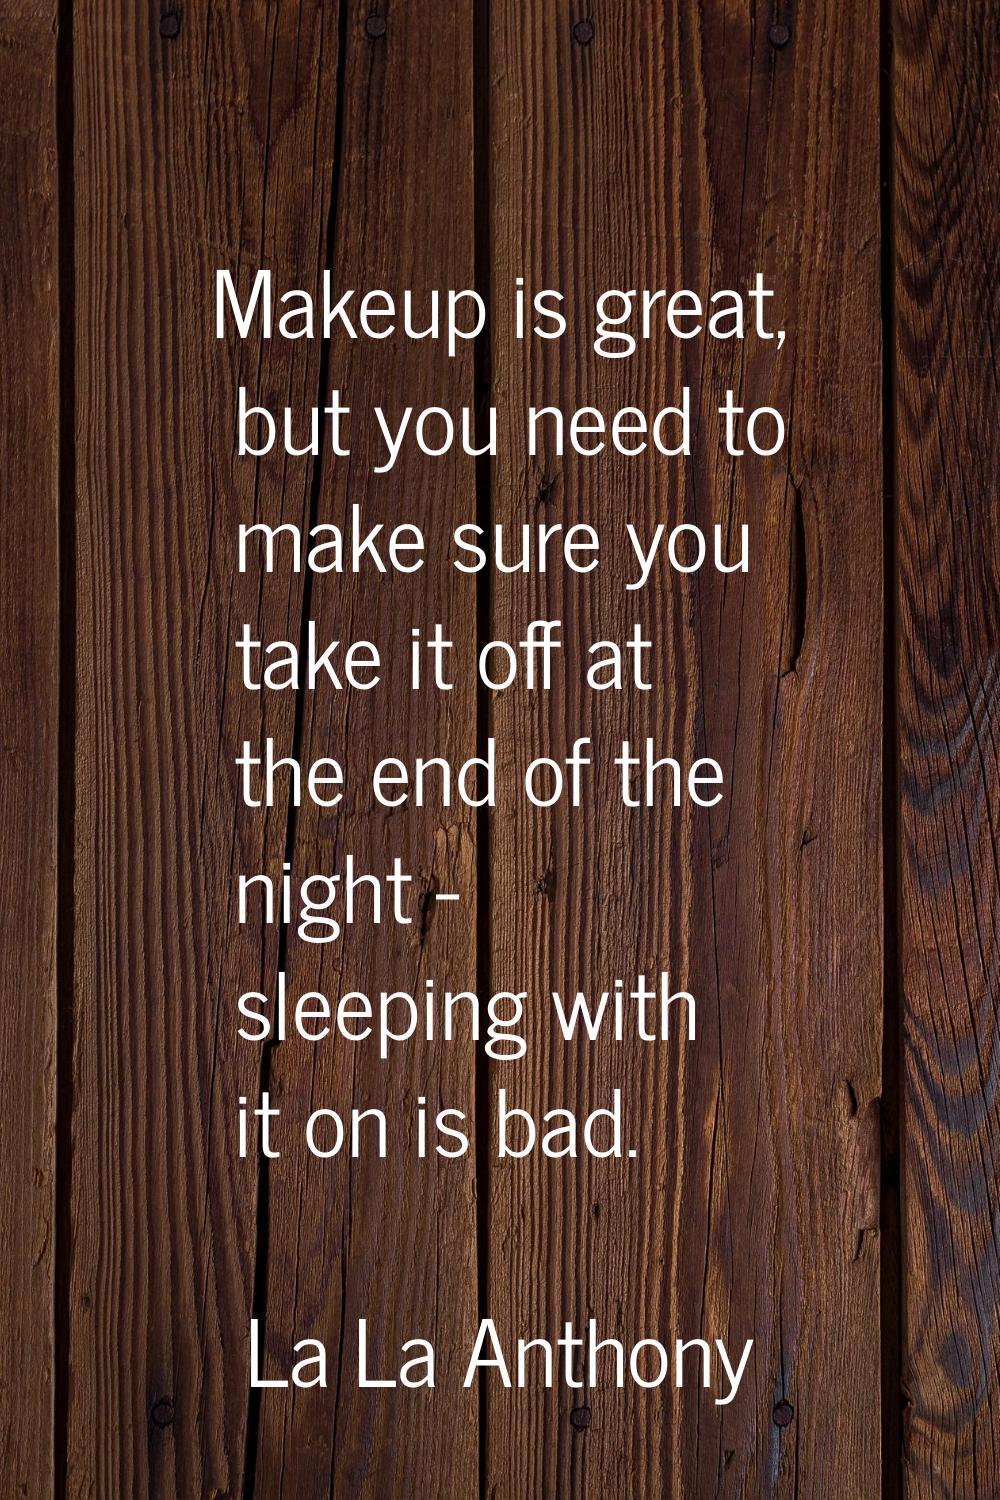 Makeup is great, but you need to make sure you take it off at the end of the night - sleeping with 